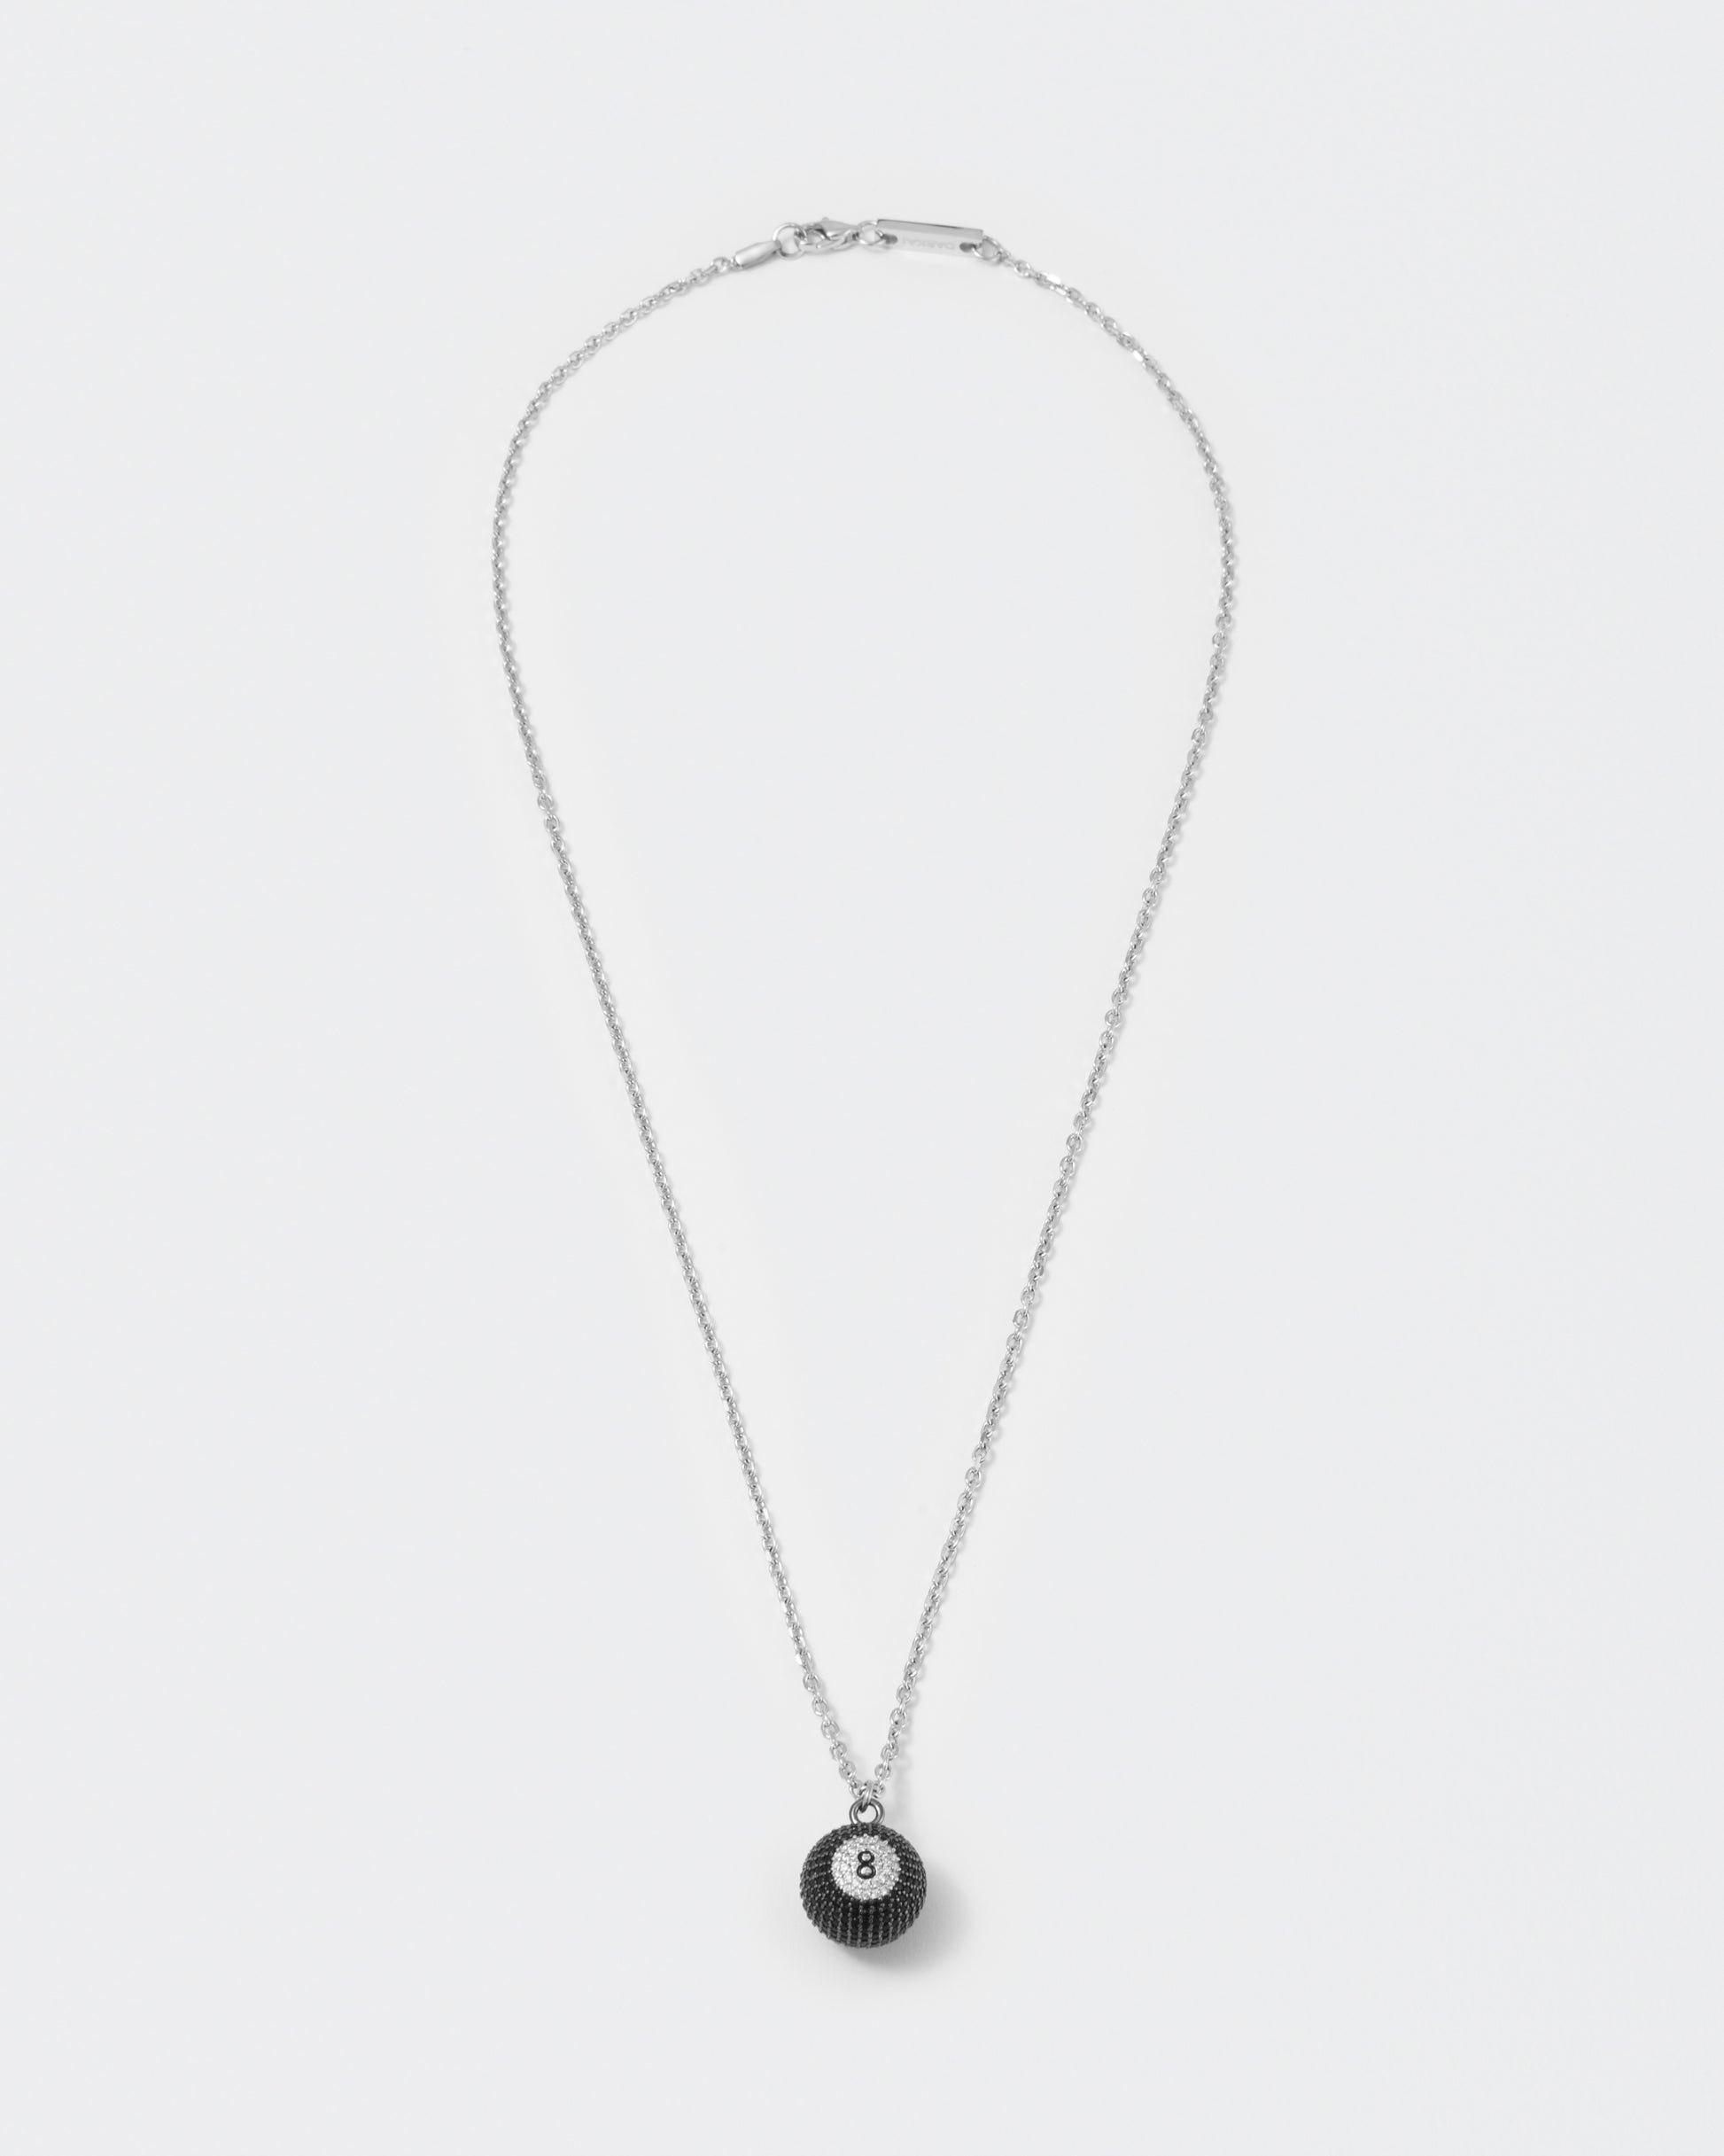 Eight ball pendant necklace with deep black PVD coating and hand-set micropavé stones in black and diamond white. Hand painted number 8 in black enamel. 2mm cable chain and lobster clasp with metal logo tag